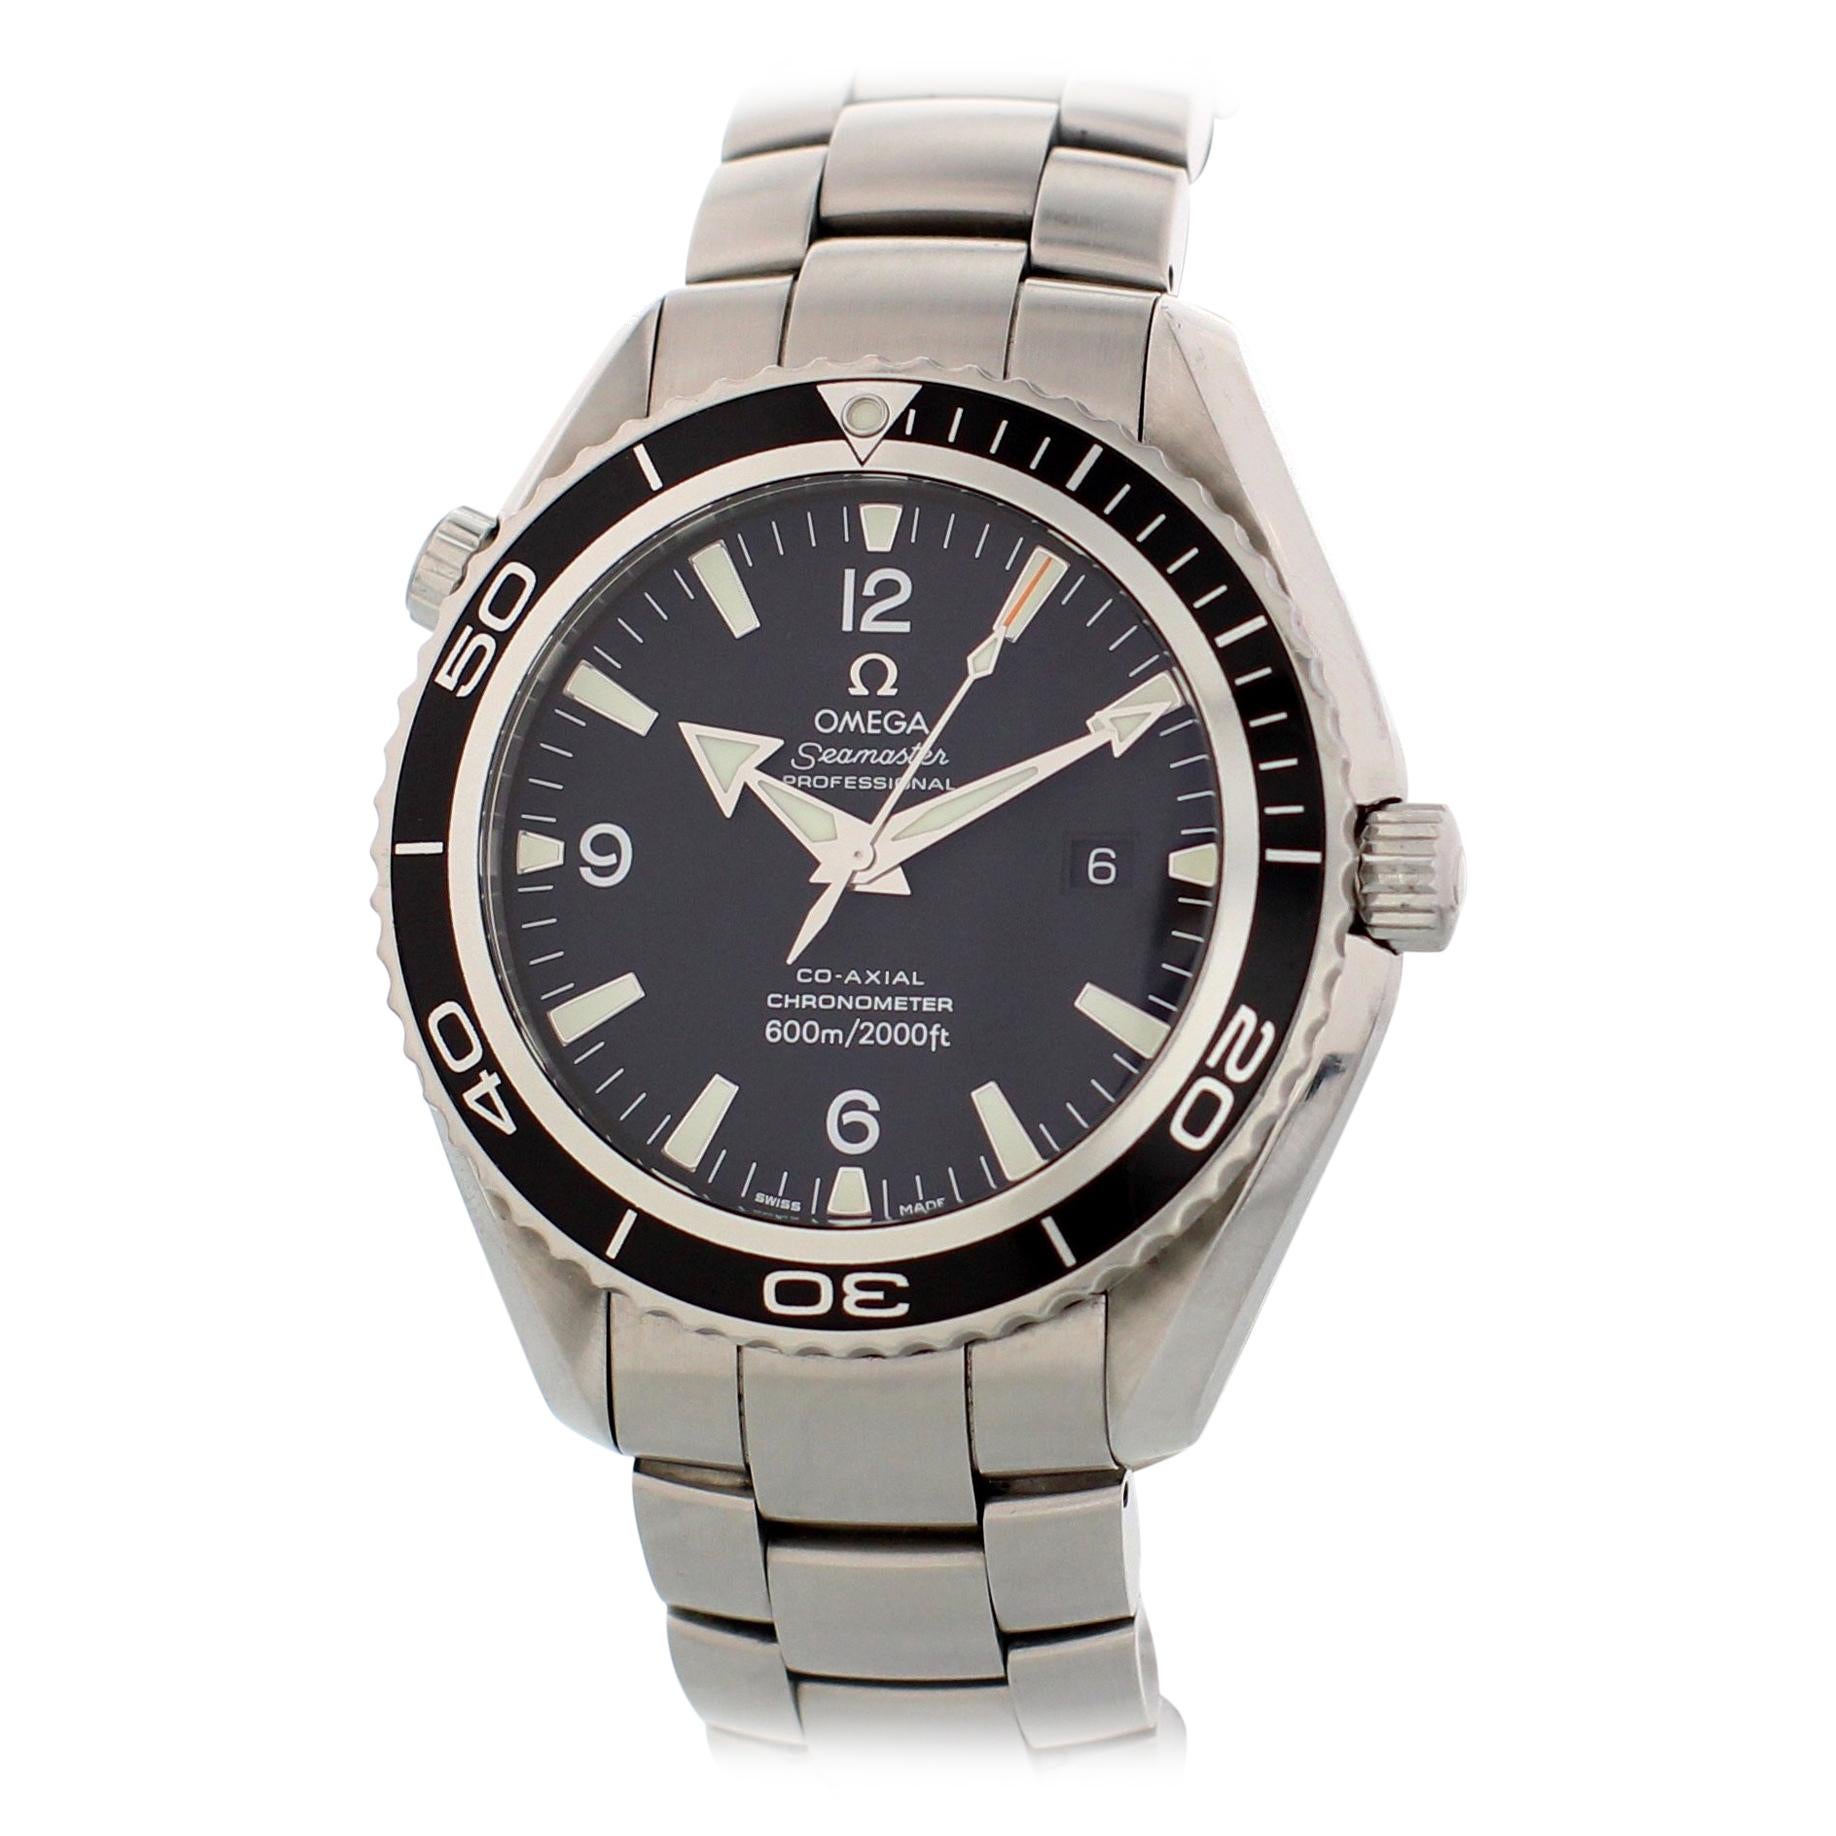 Omega Seamaster Planet Ocean Extra Large 2200.51.00 Co-Axial Men's Watch For Sale